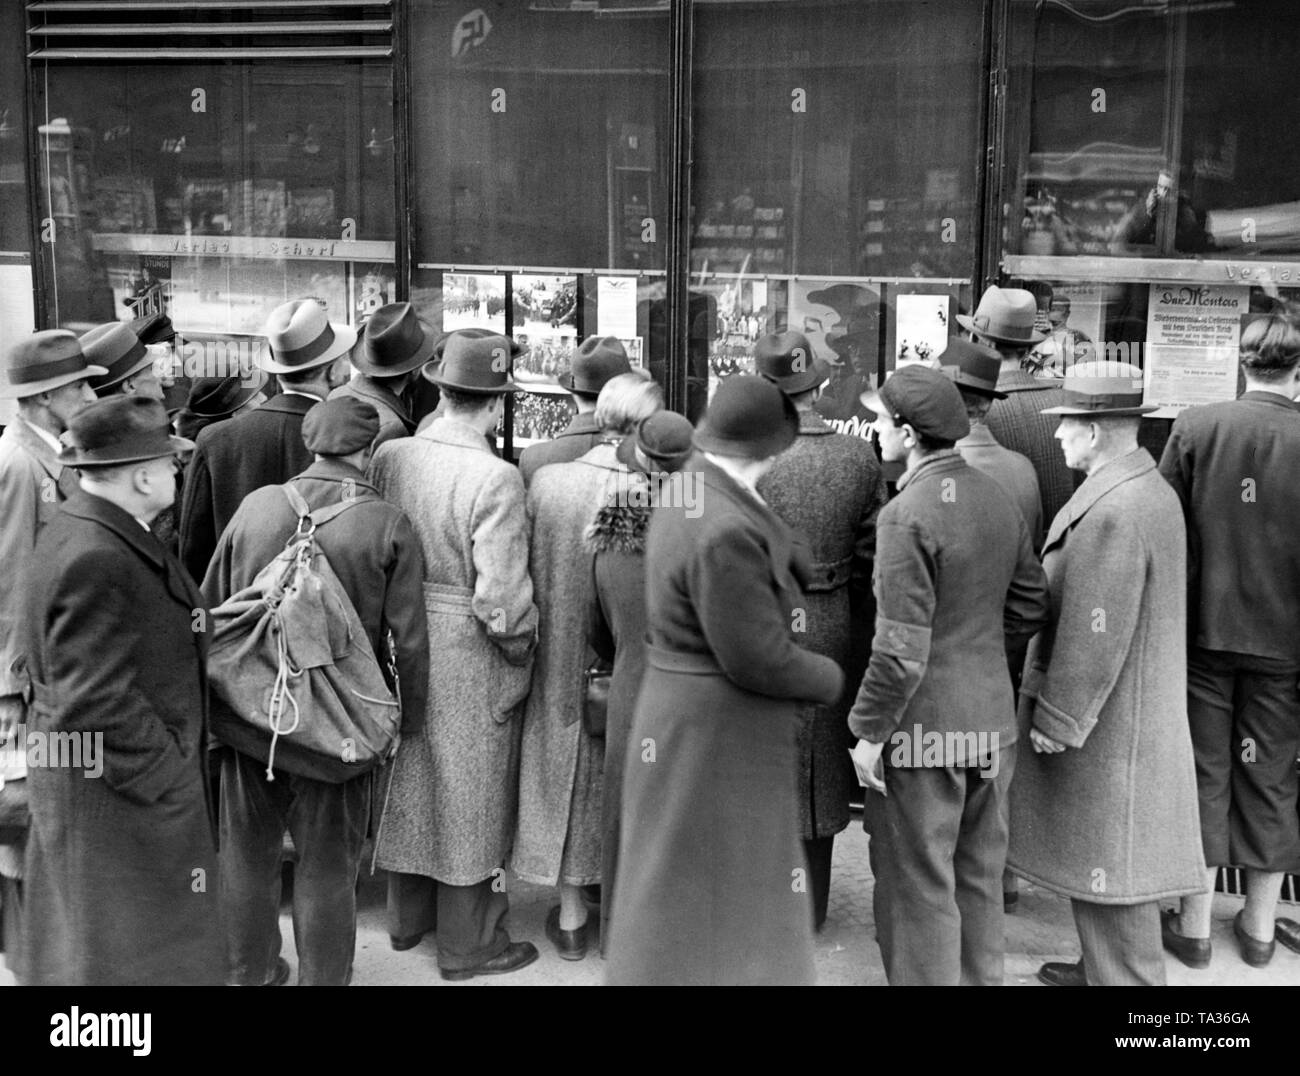 Crowd observing the latest propaganda photos in front of the Sherl publishing house in Berlin Stock Photo